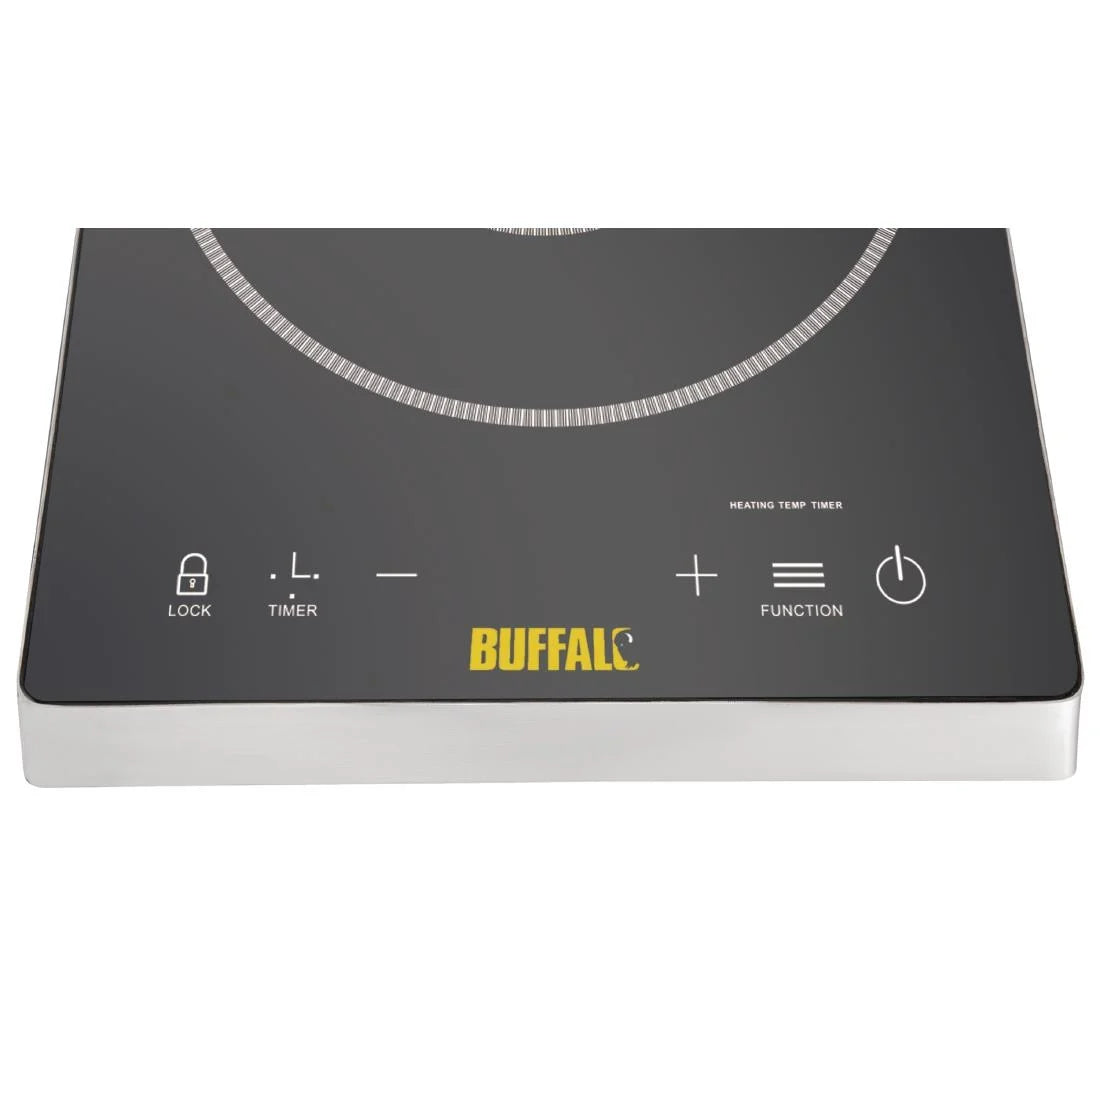 Buffalo Touch Control Single Induction Hob 3kW.Product Ref:00708.Model:DF825. 🚚 3-5 Days Delivery